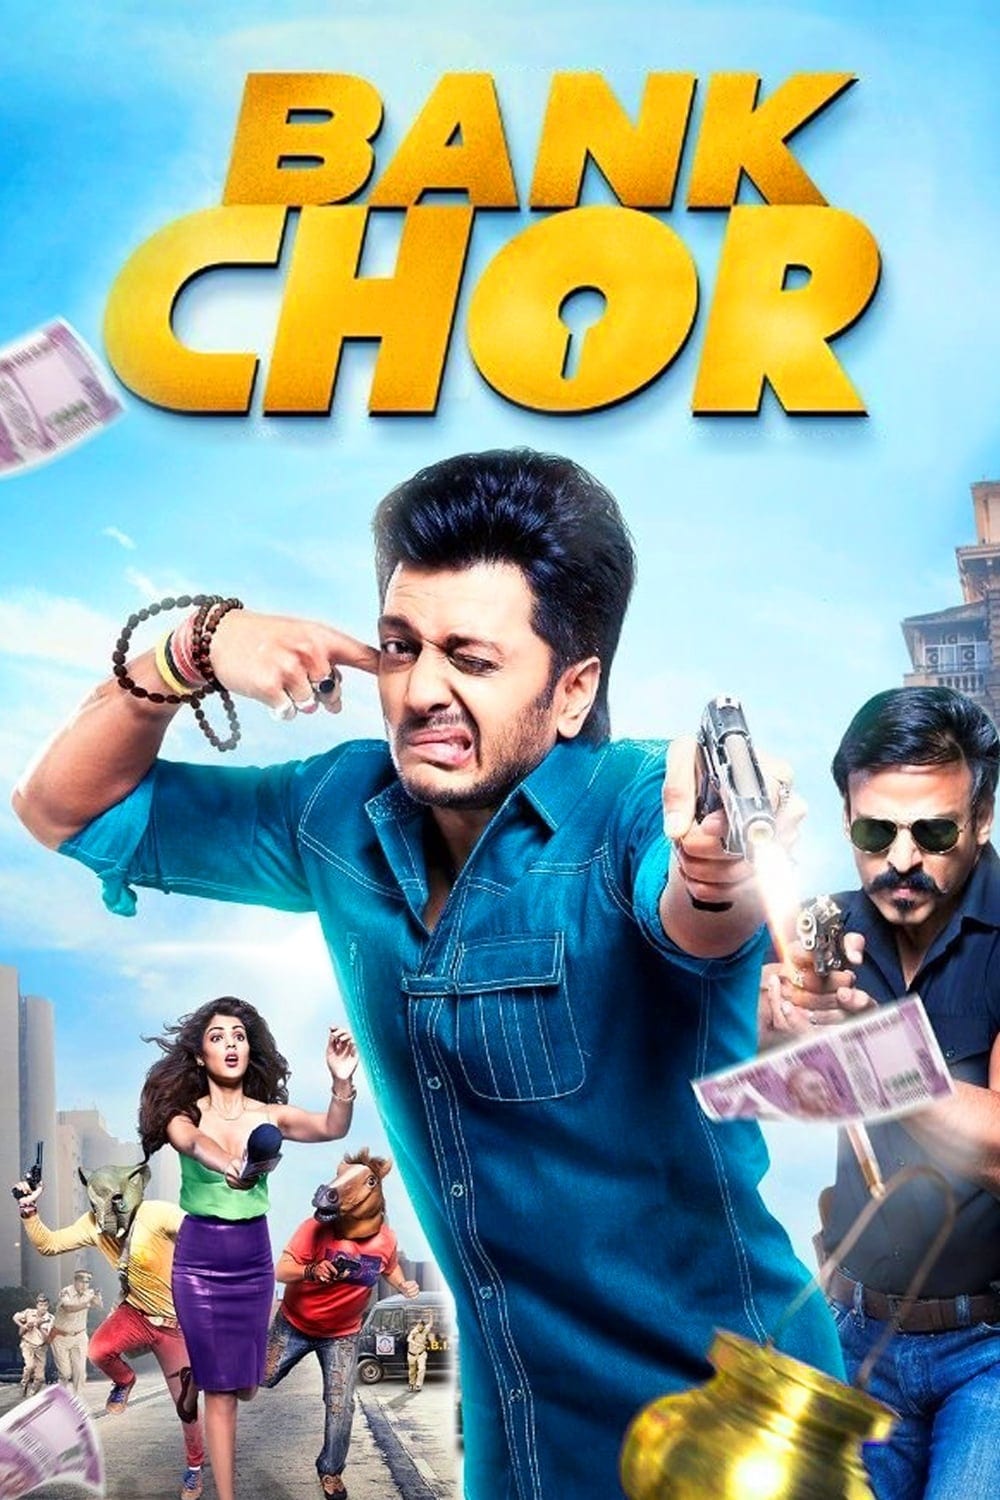 Poster for the movie "Bank Chor"